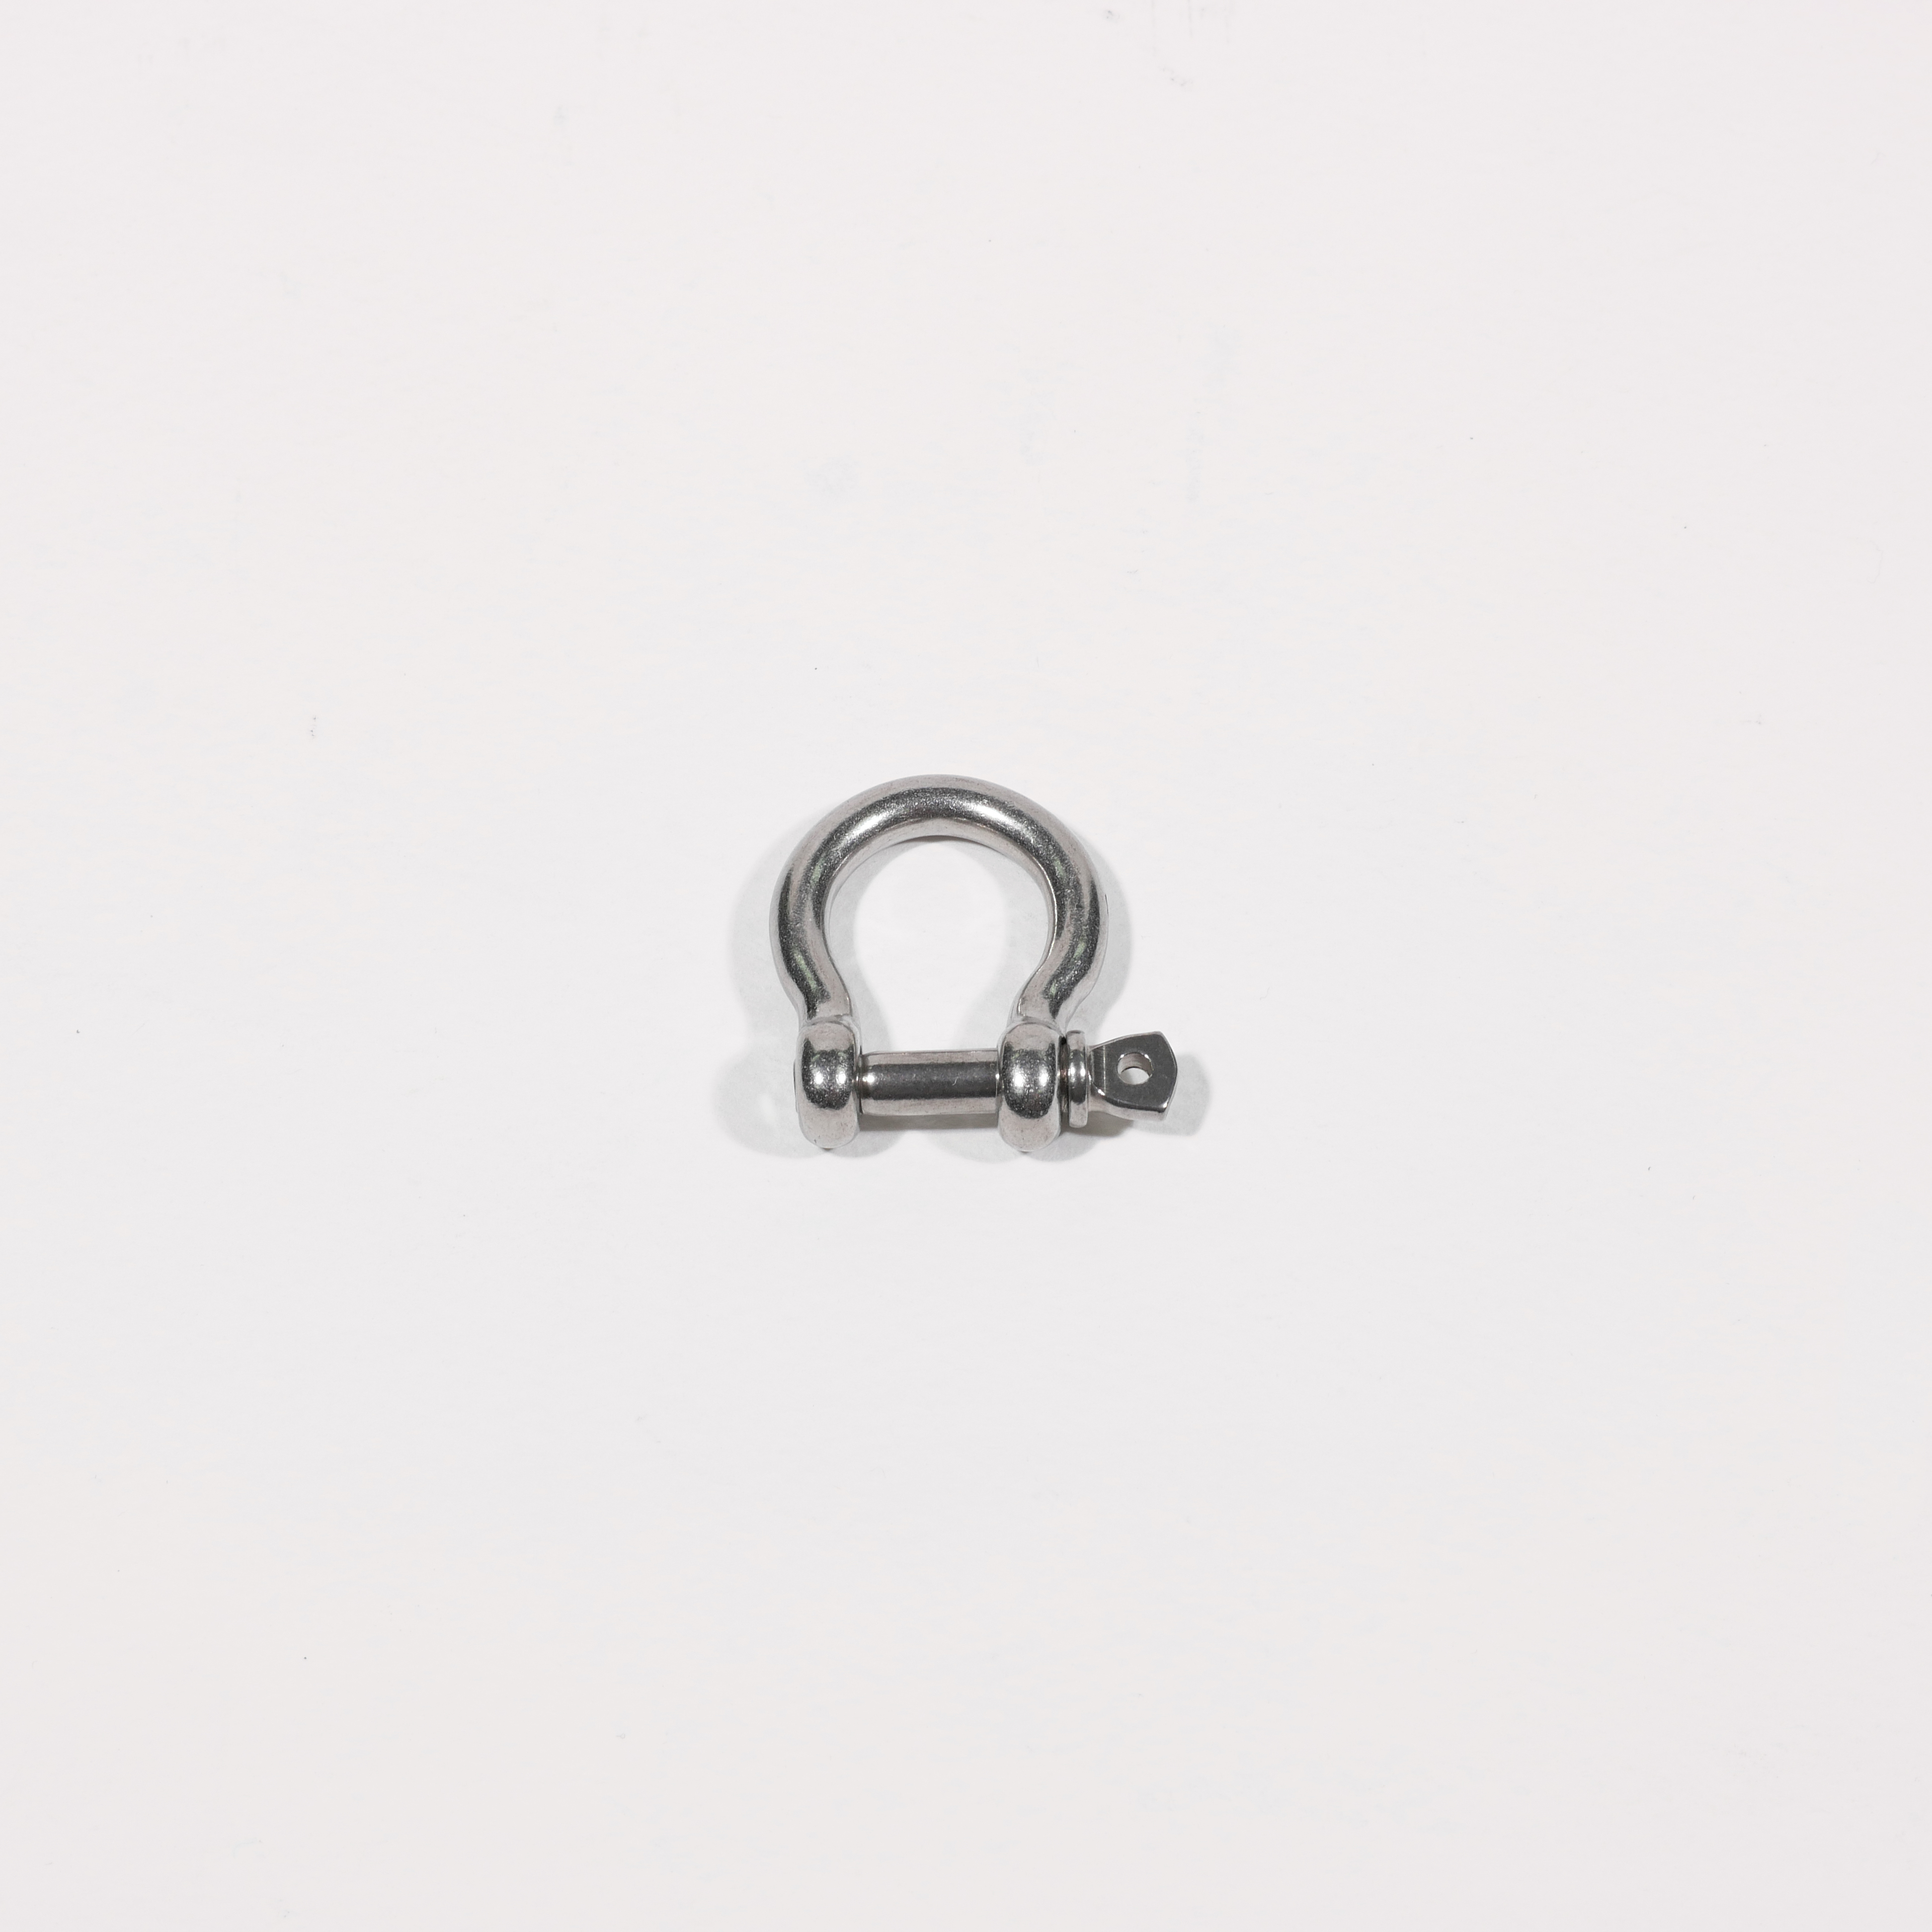 [TO] Bow shackle 1904-05